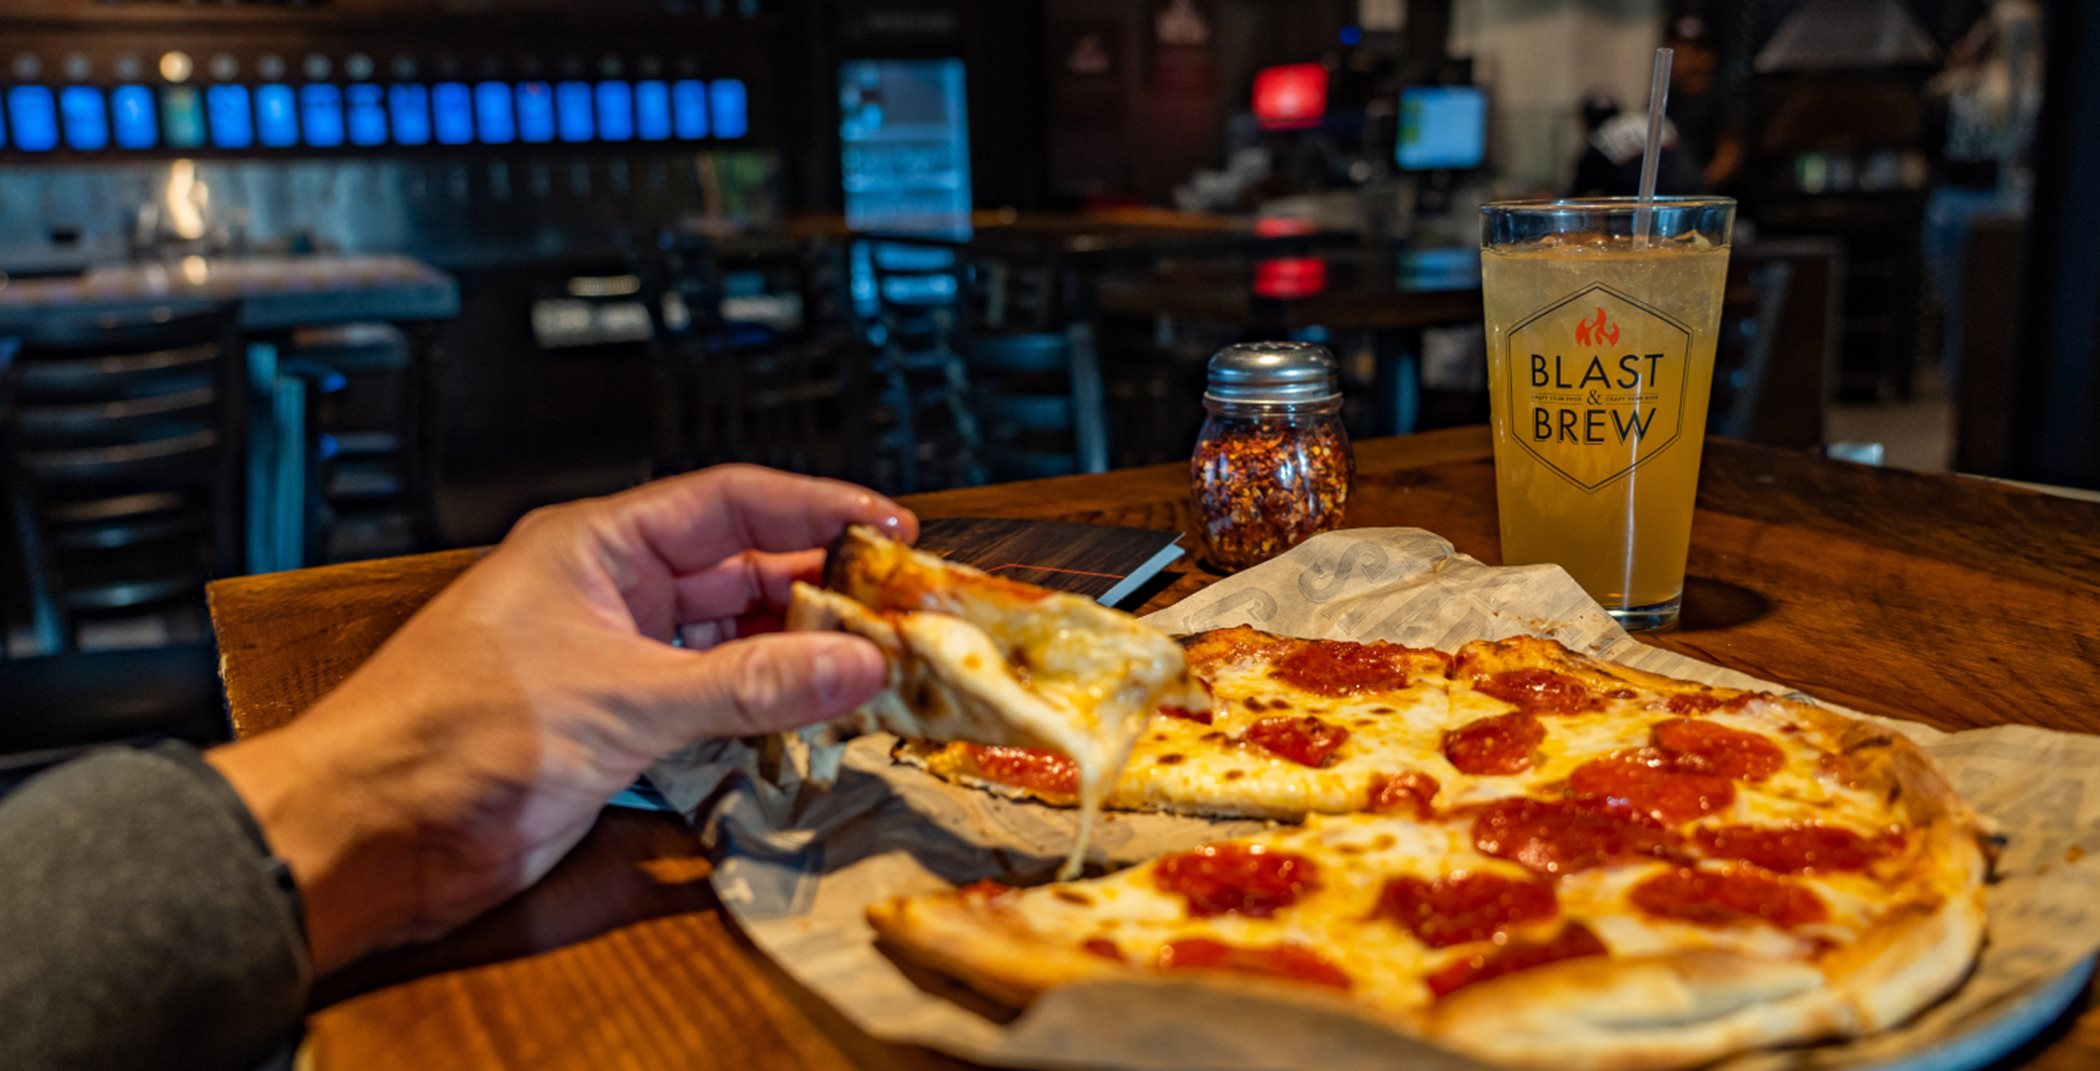 Man holding pizza slice with blast and brew beer